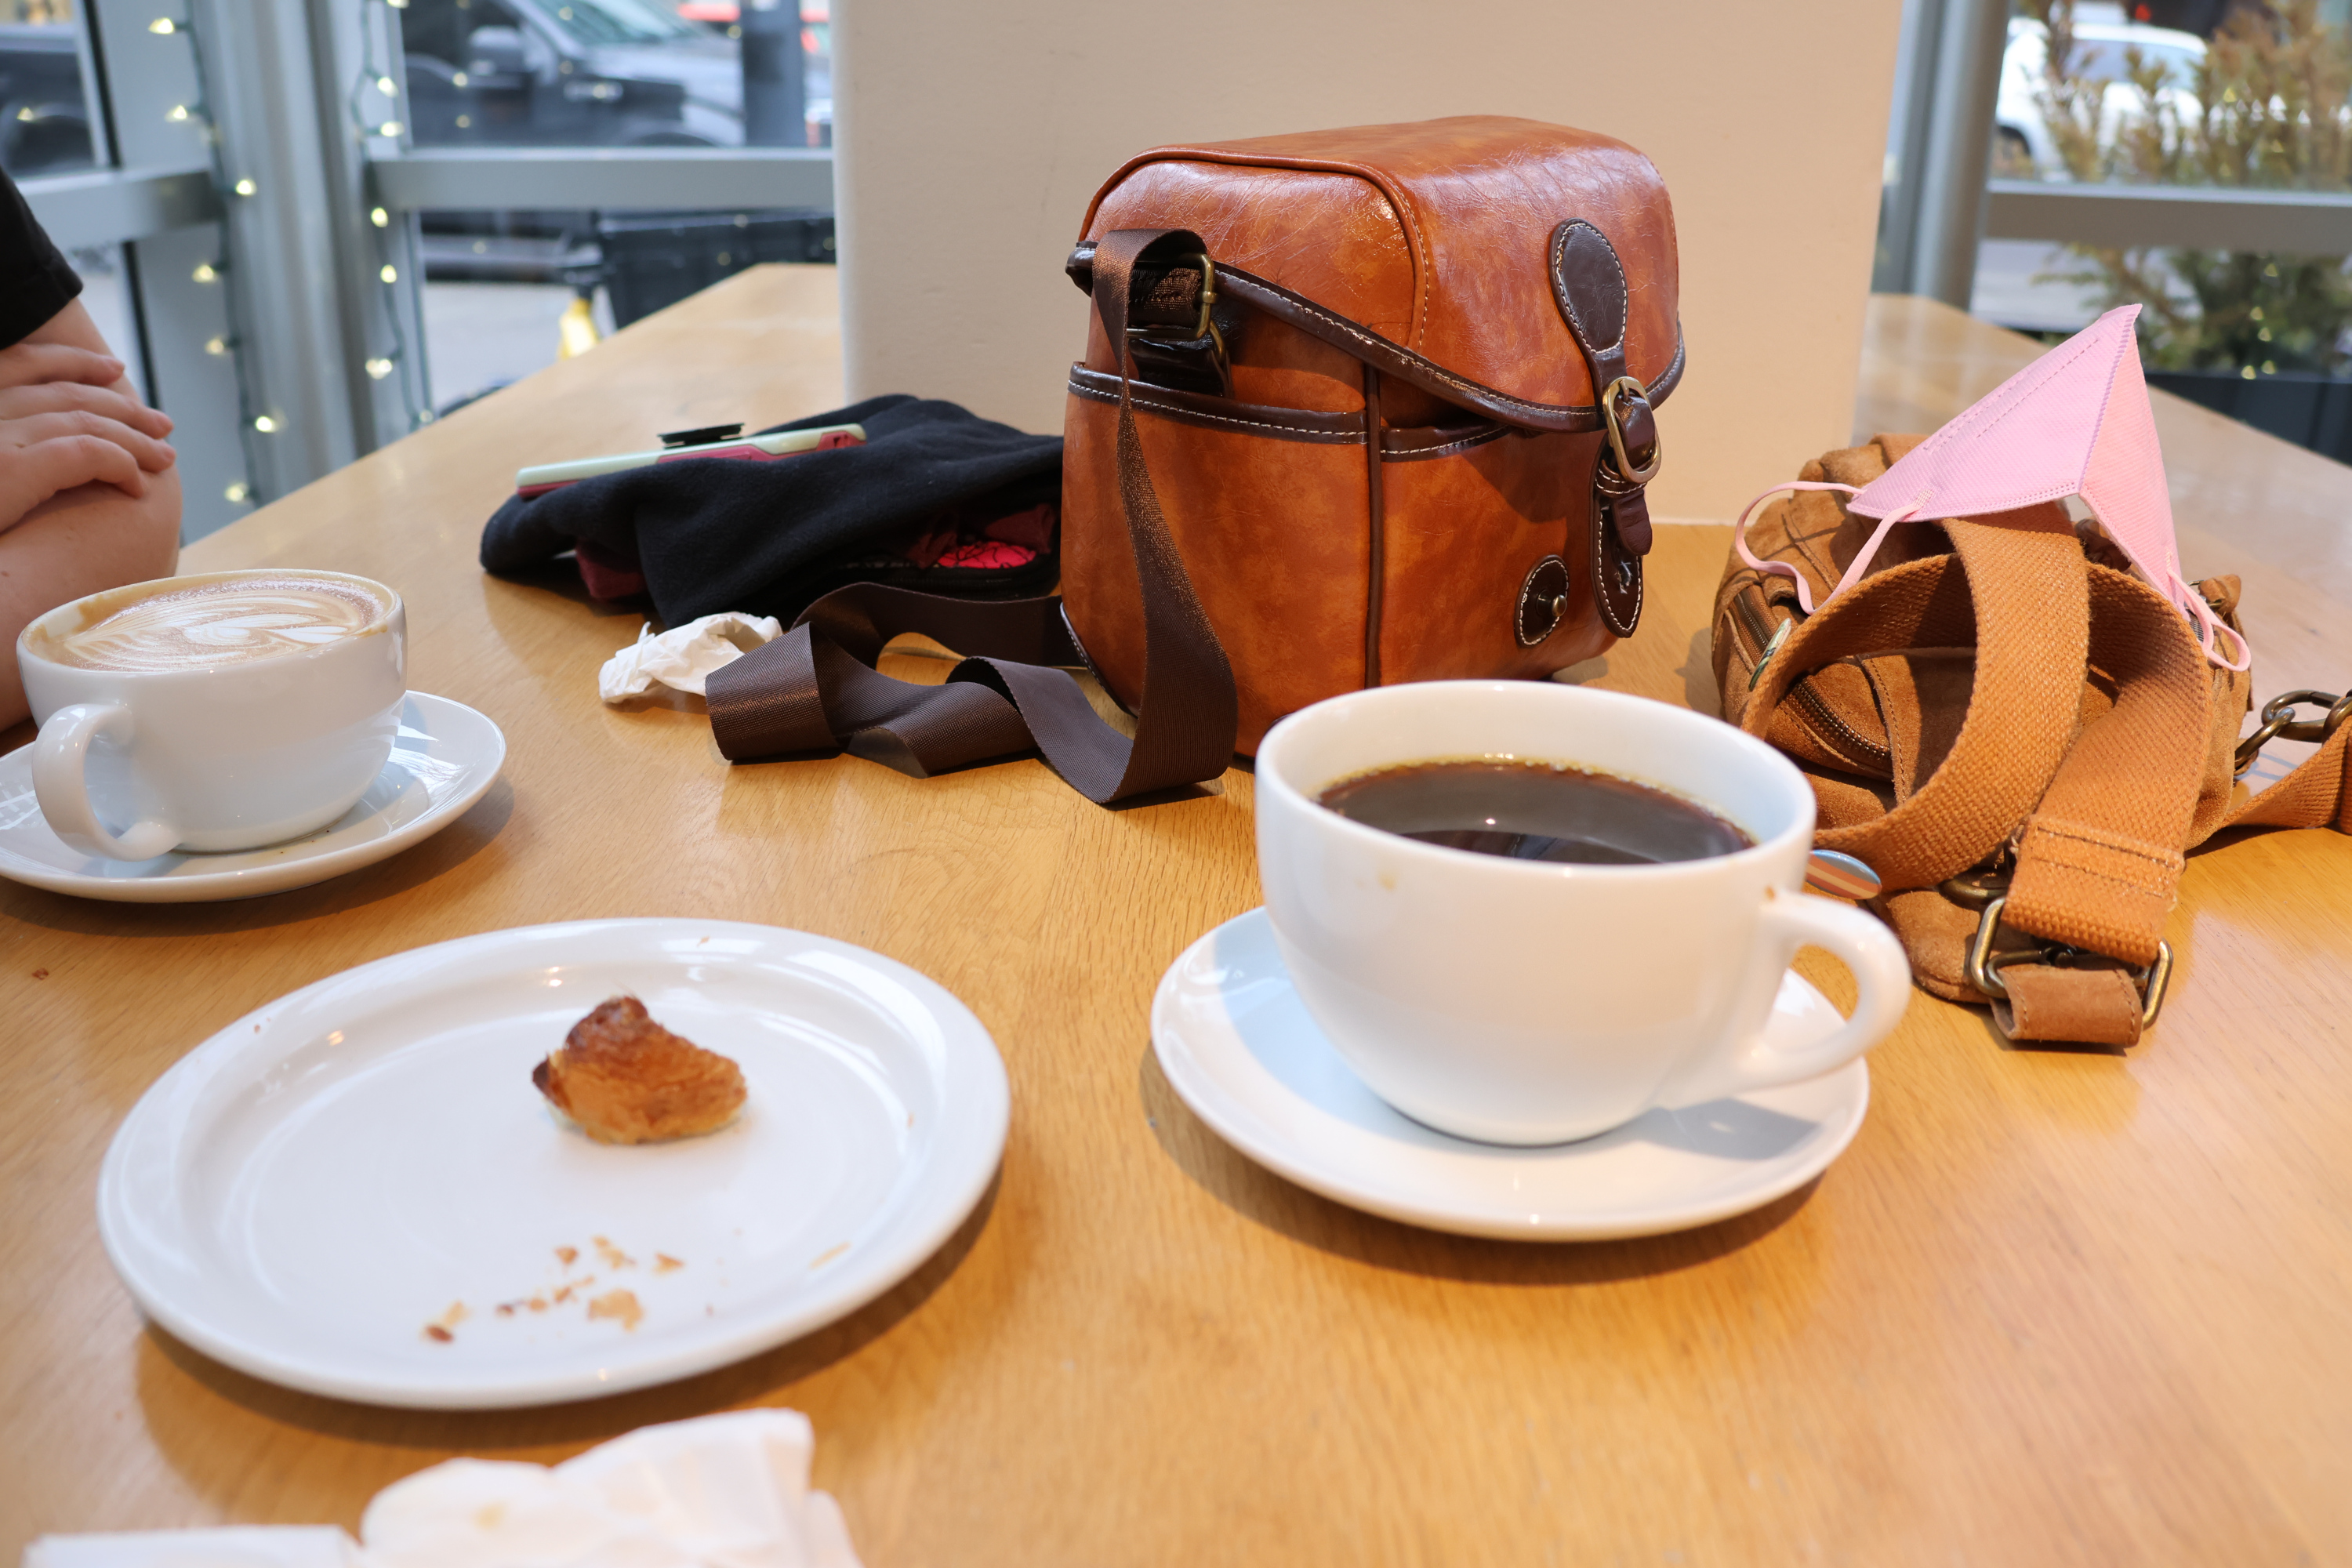 Our table at a breakfast restaurant. Our personal bags, scarfs, and Morrie's phone are on the table. A plate with the last bit of a croissant sits between us. We each have a large; mine a coffee, hers a latte.